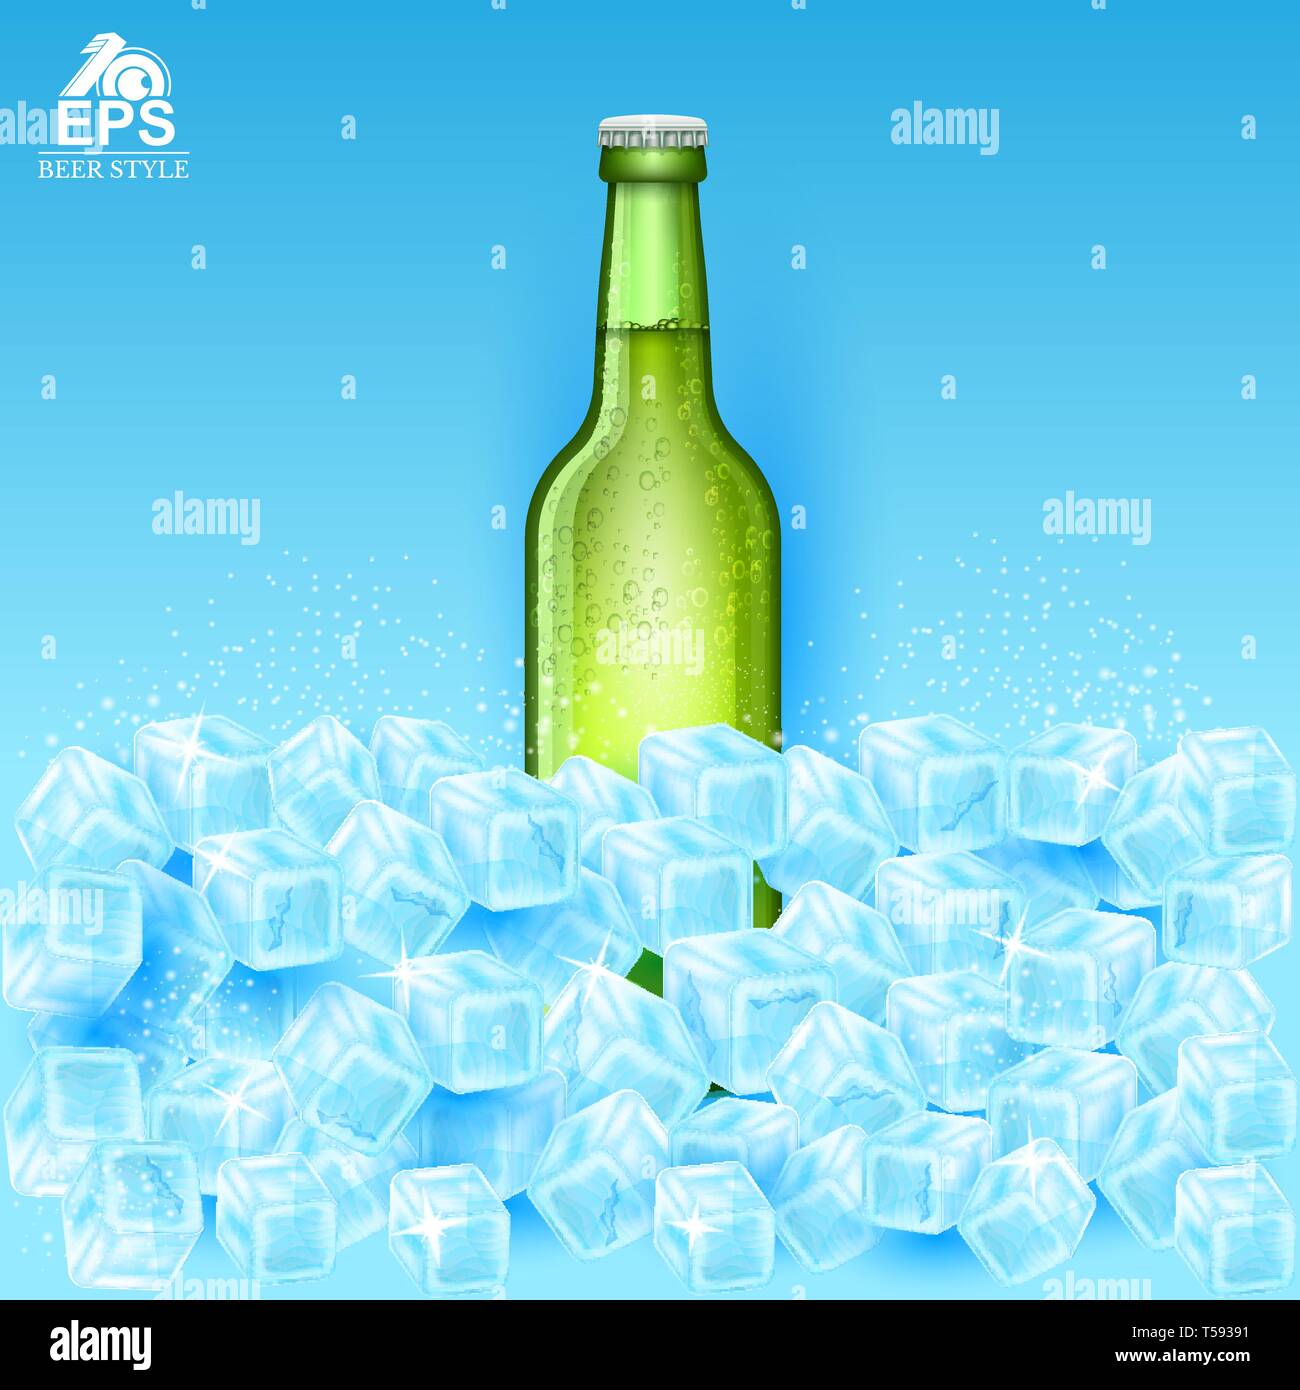 Realistic mock up green bottle of beer among ice cubes on blue background Stock Vector